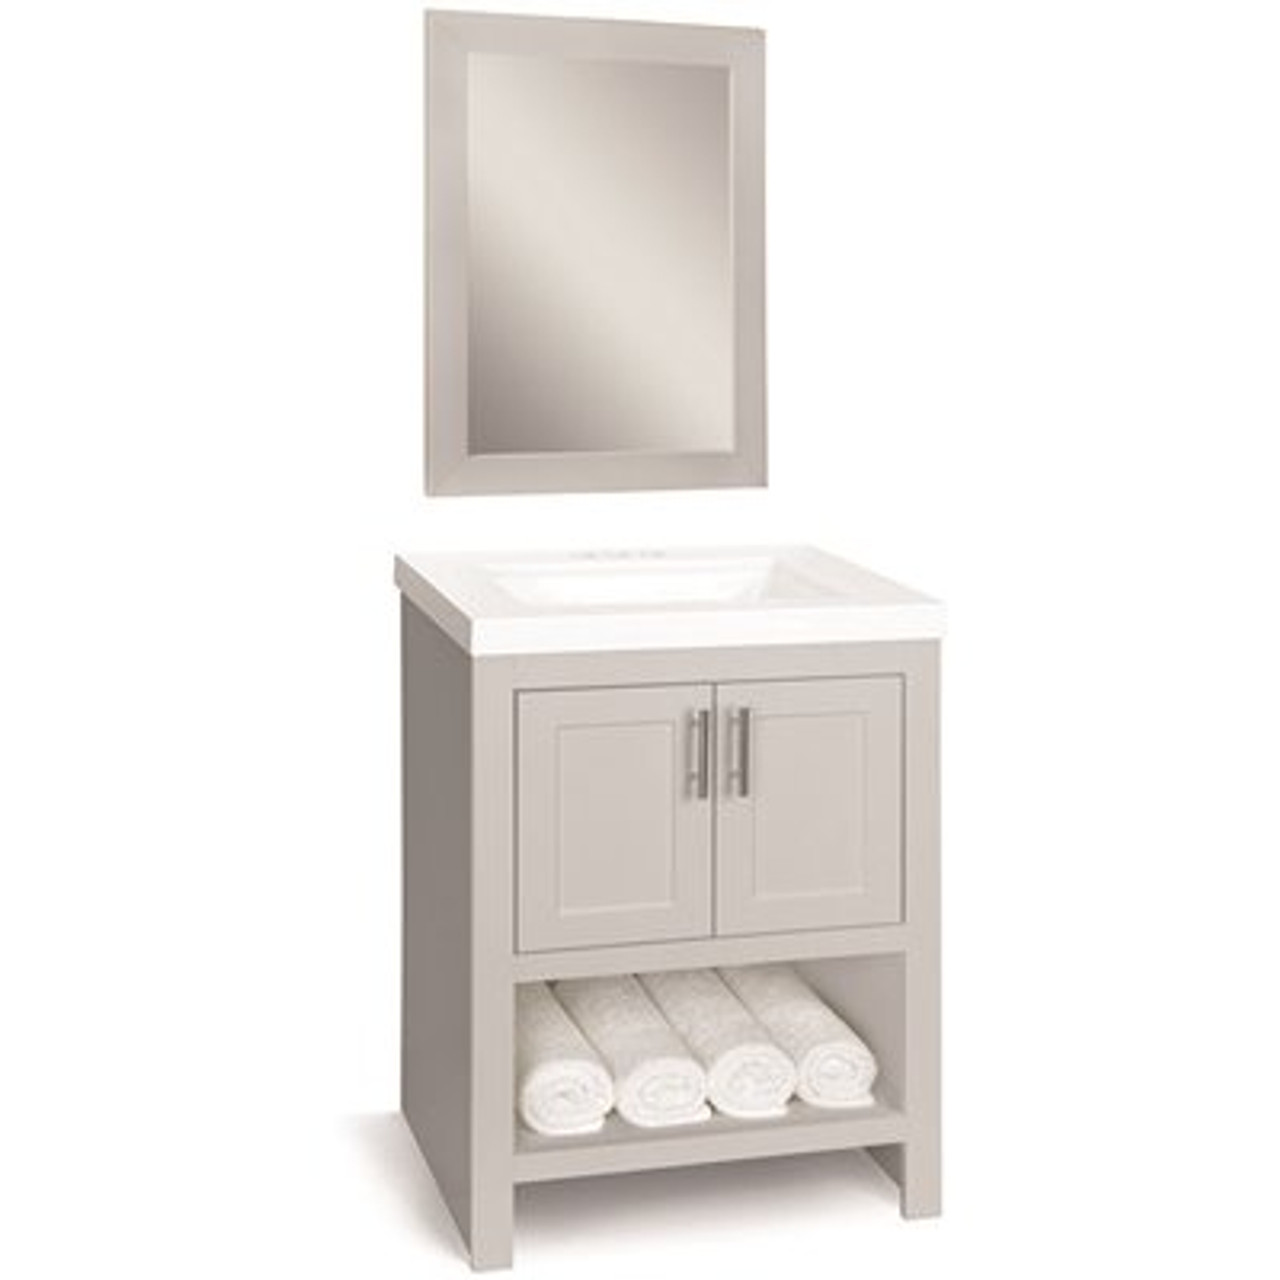 Glacier Bay Spa 24.5 In. W Bath Vanity In Dove Gray With Cultured Marble Vanity Top In White With White Basin And Mirror